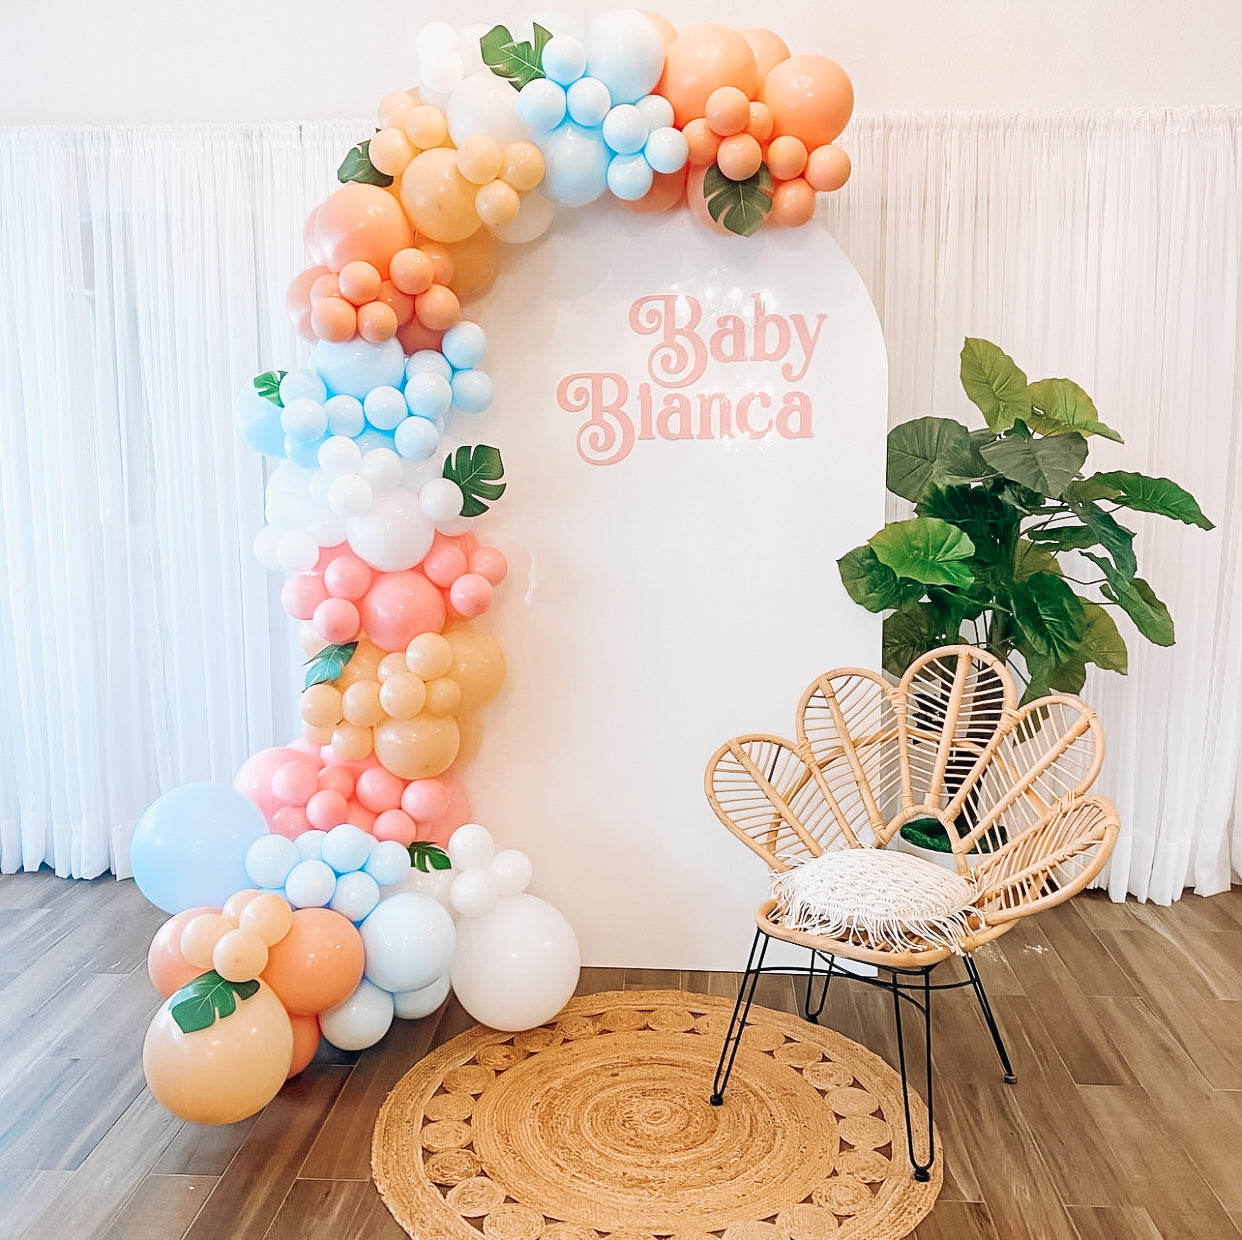 Baby shower backdrop in white and pink letters that read “baby Bianca” in a tropical font. Rattan boho flower accent chair, boho rug and balloons in white, blue, pink and peach colors with monstera leaves attached to them. 